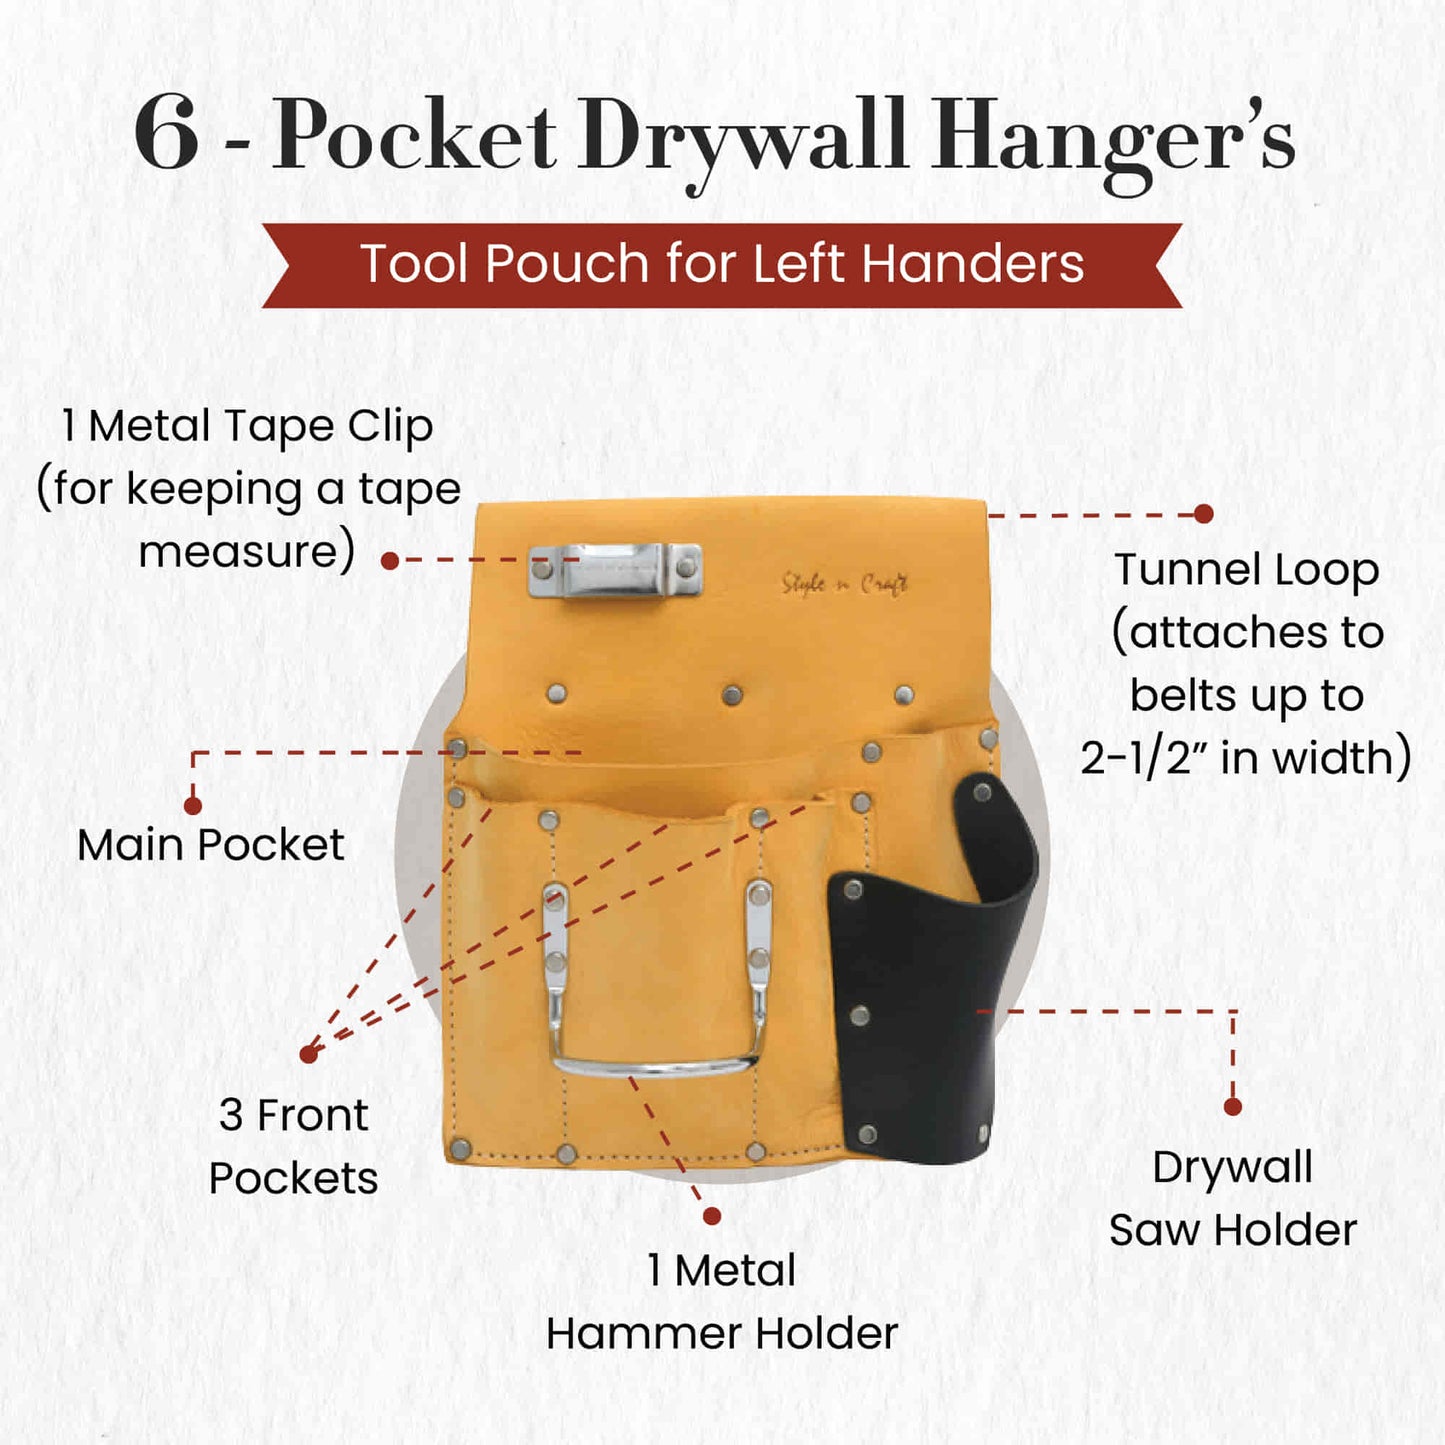 Style n Craft 93485L - 6 Pocket Drywall Hanger's Tool Pouch for Left Handed People in Yellow Color Full Grain Leather with Leather Saw Holder in Black Full Grain Leather - Front View Showing the Details